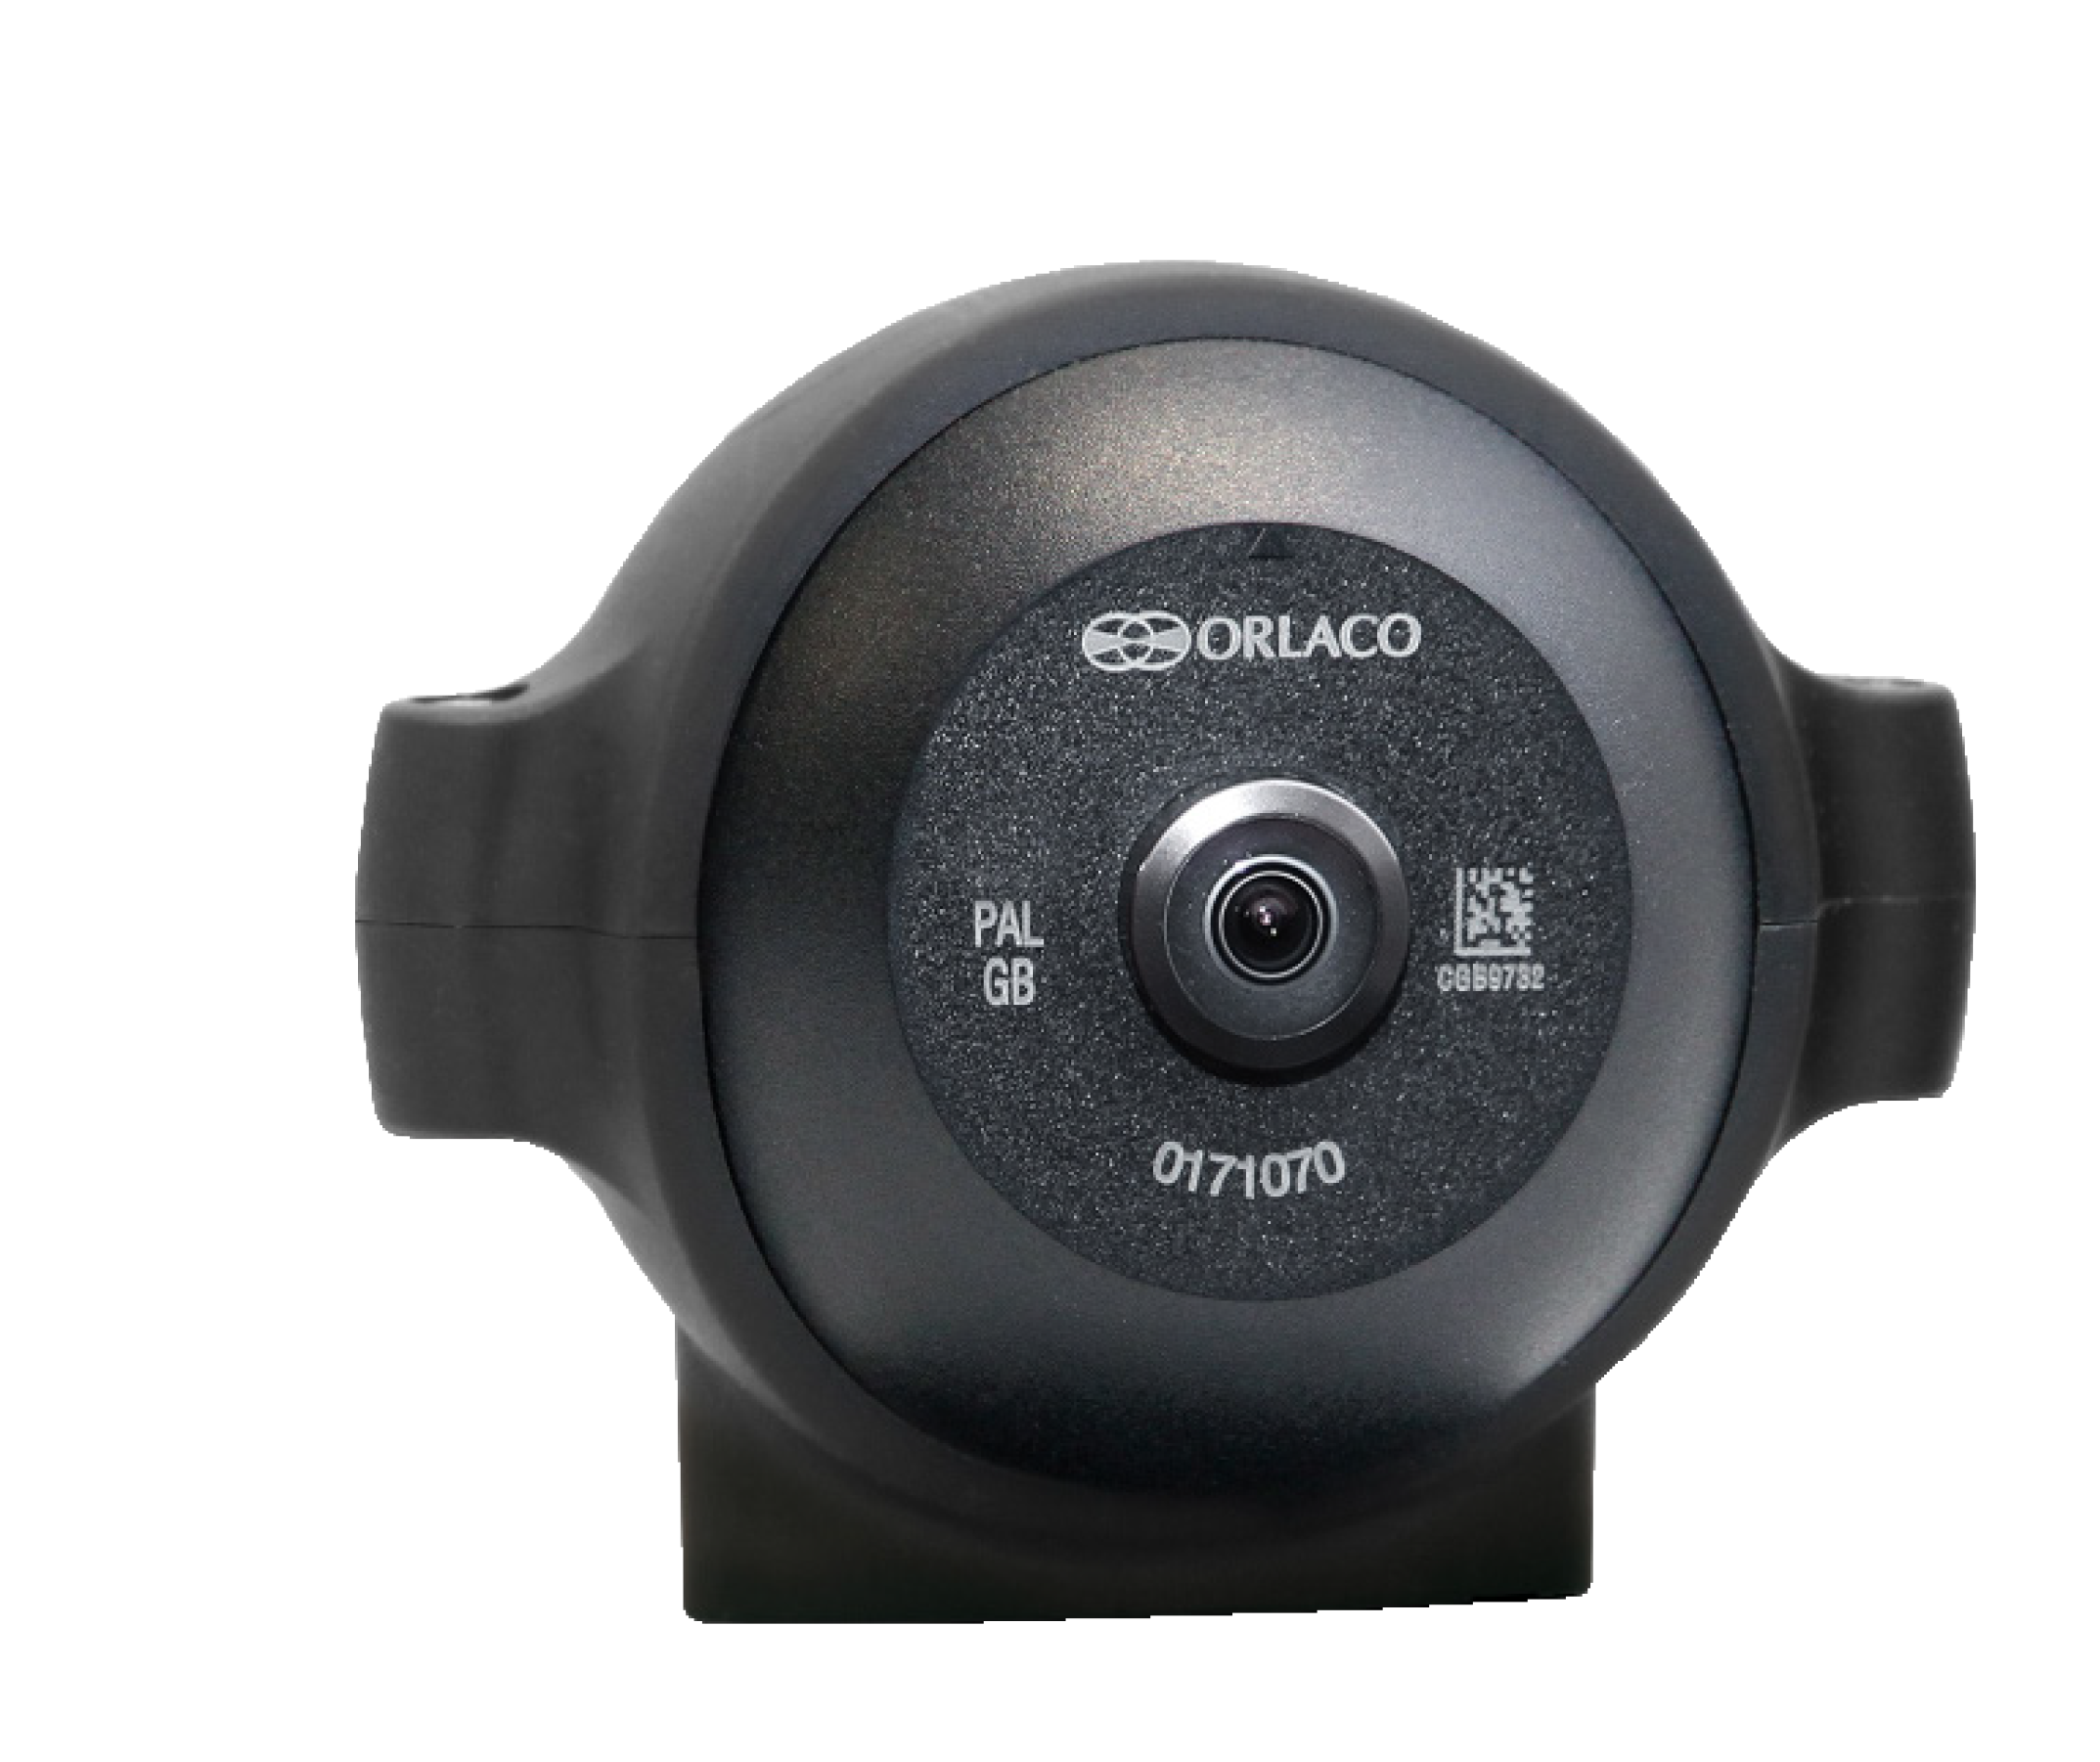 Orlaco compact camera FAMOS for analog camera systems for forklift trucks